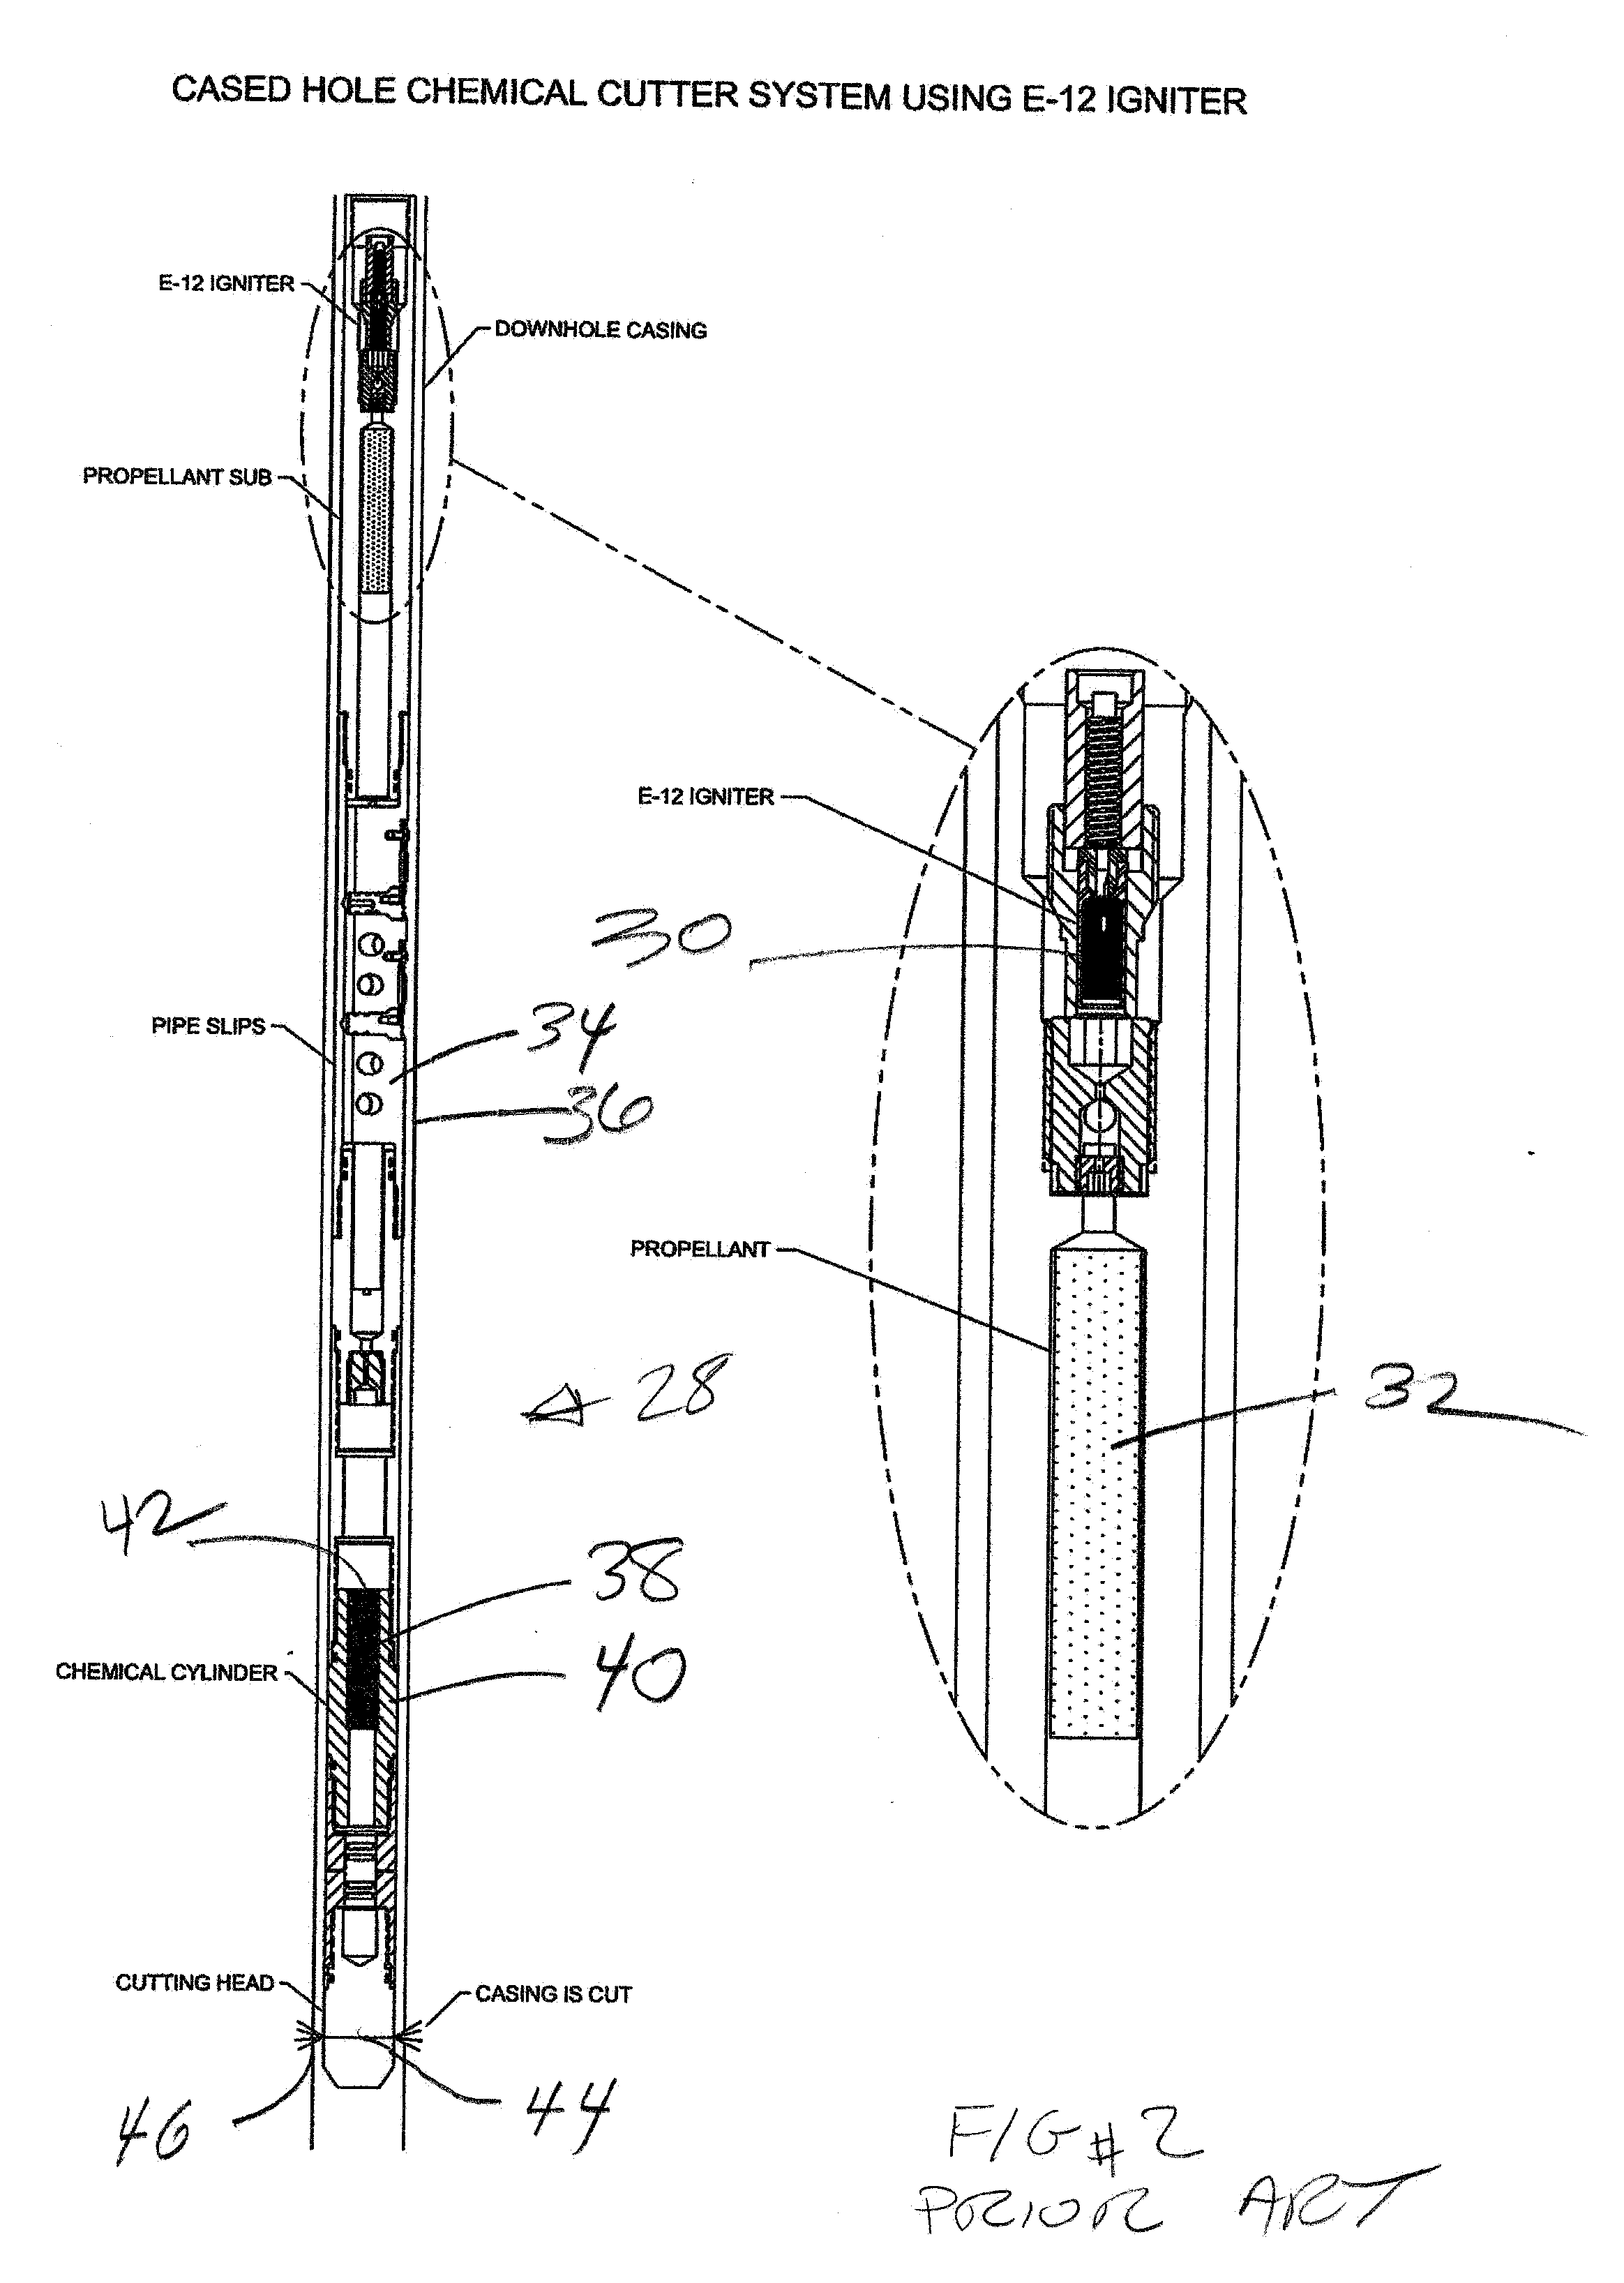 Resistor-based Ignition System for a Core Gun